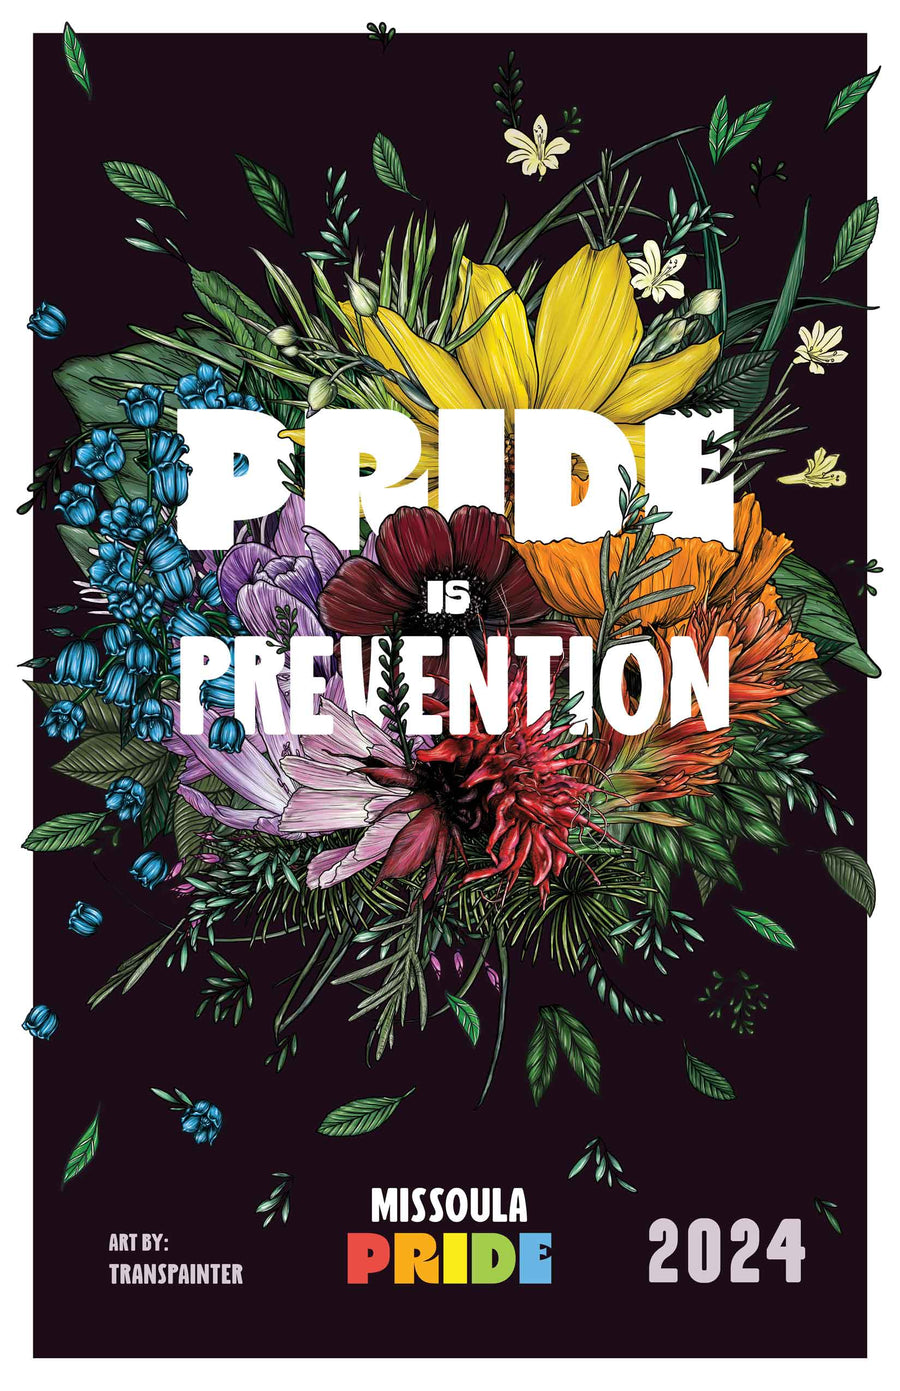 Collectible 11x17 poster featuring the 2024 Missoula Pride 'Pride is Prevention' design